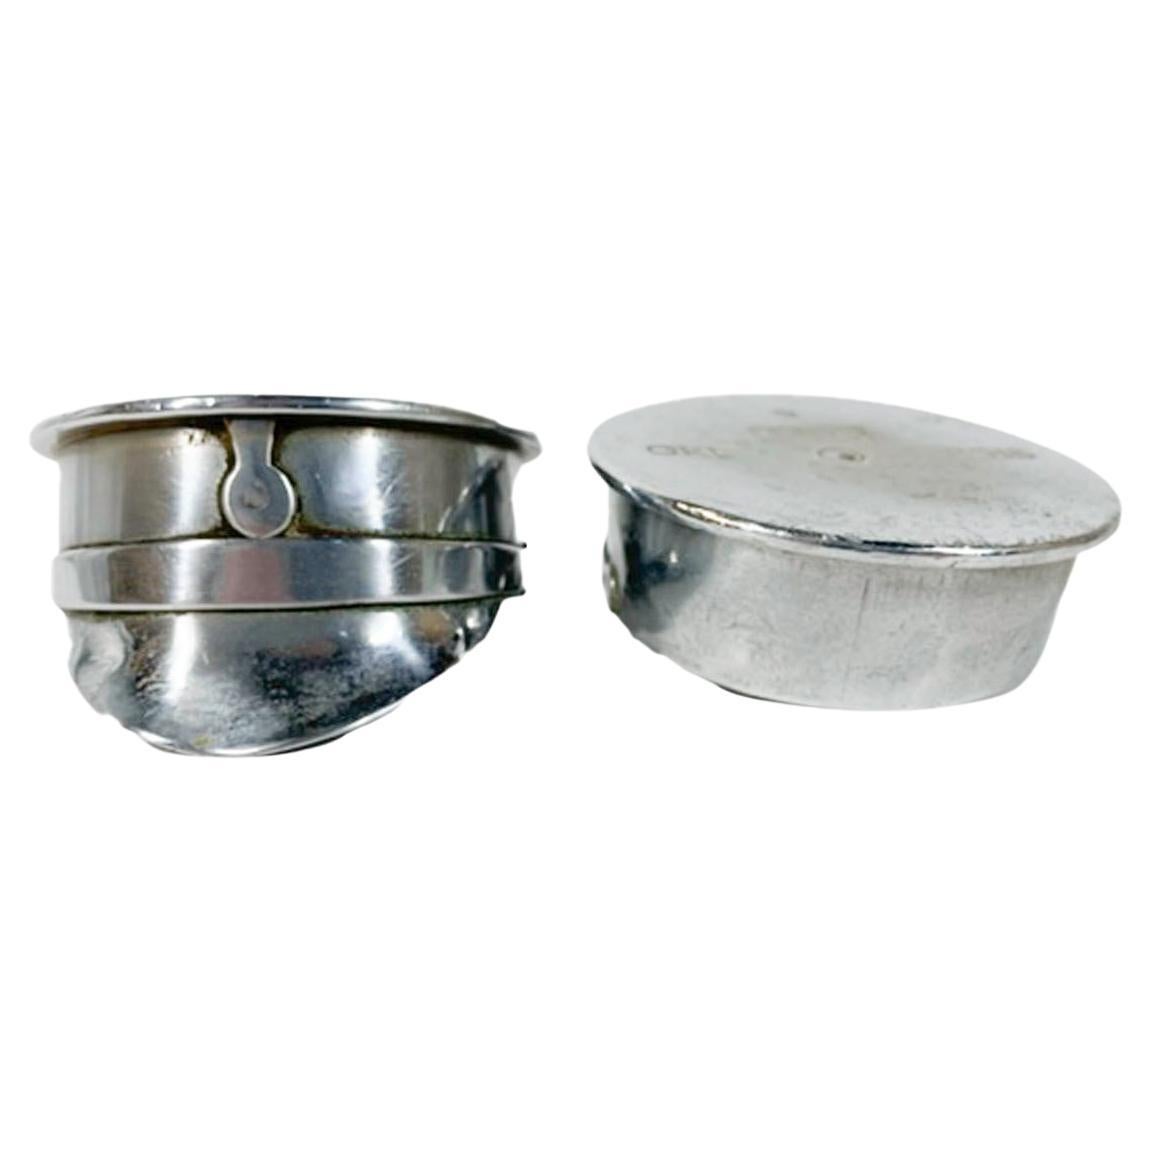 Pair WWI Artillery Shell Trench Art Ashtrays as Polished Steel Military Hats